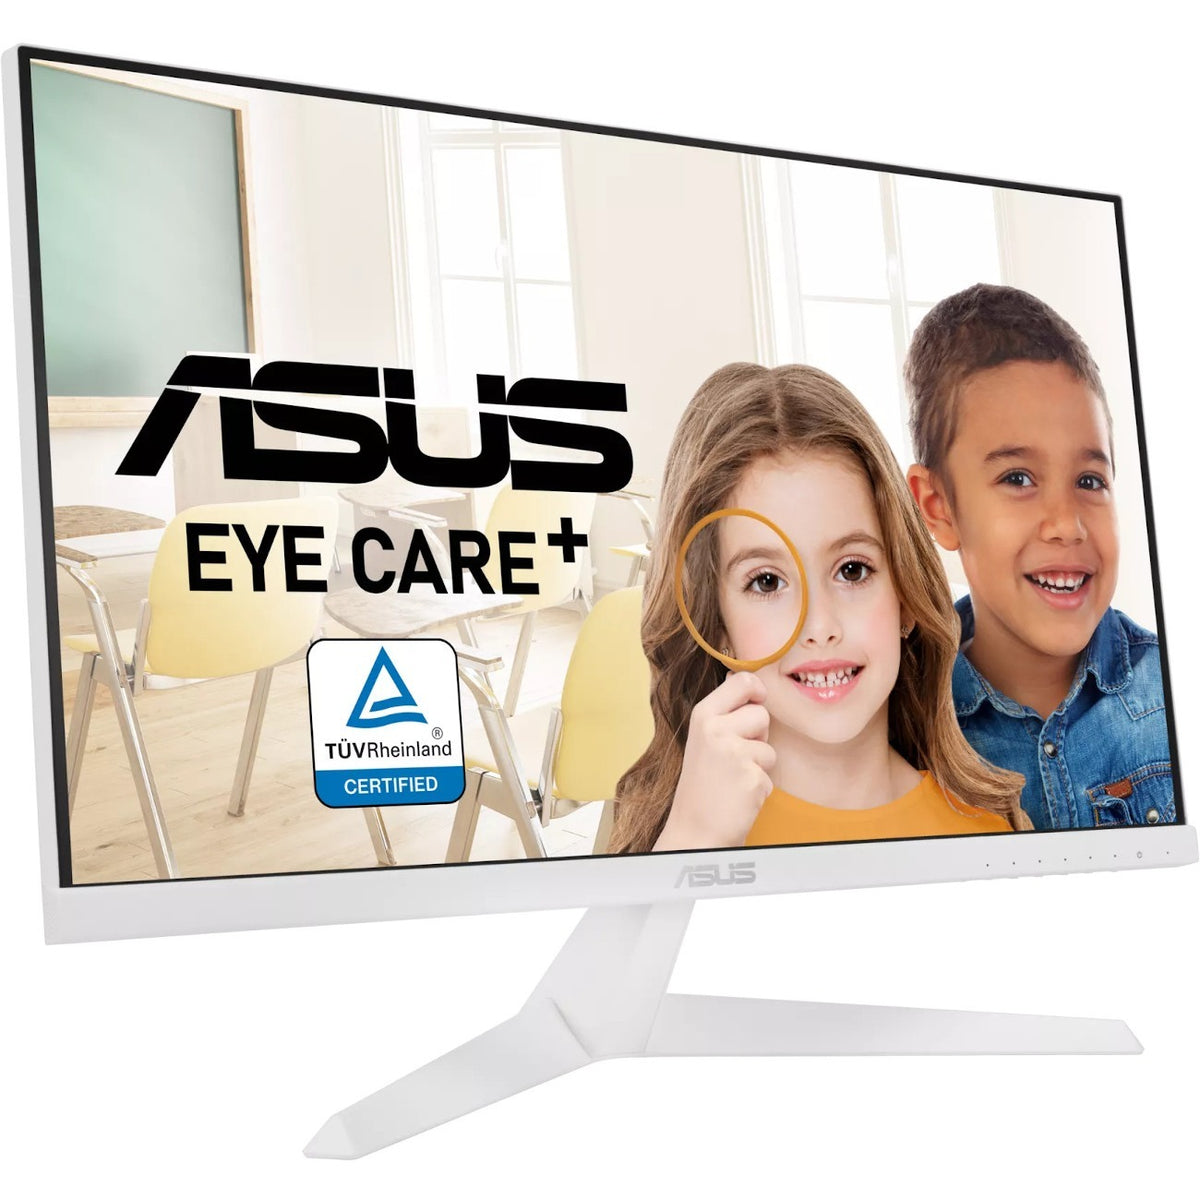 Asus VY249HE-W 24" Class Full HD LCD Monitor - 16:9 - White - VY249HE-W